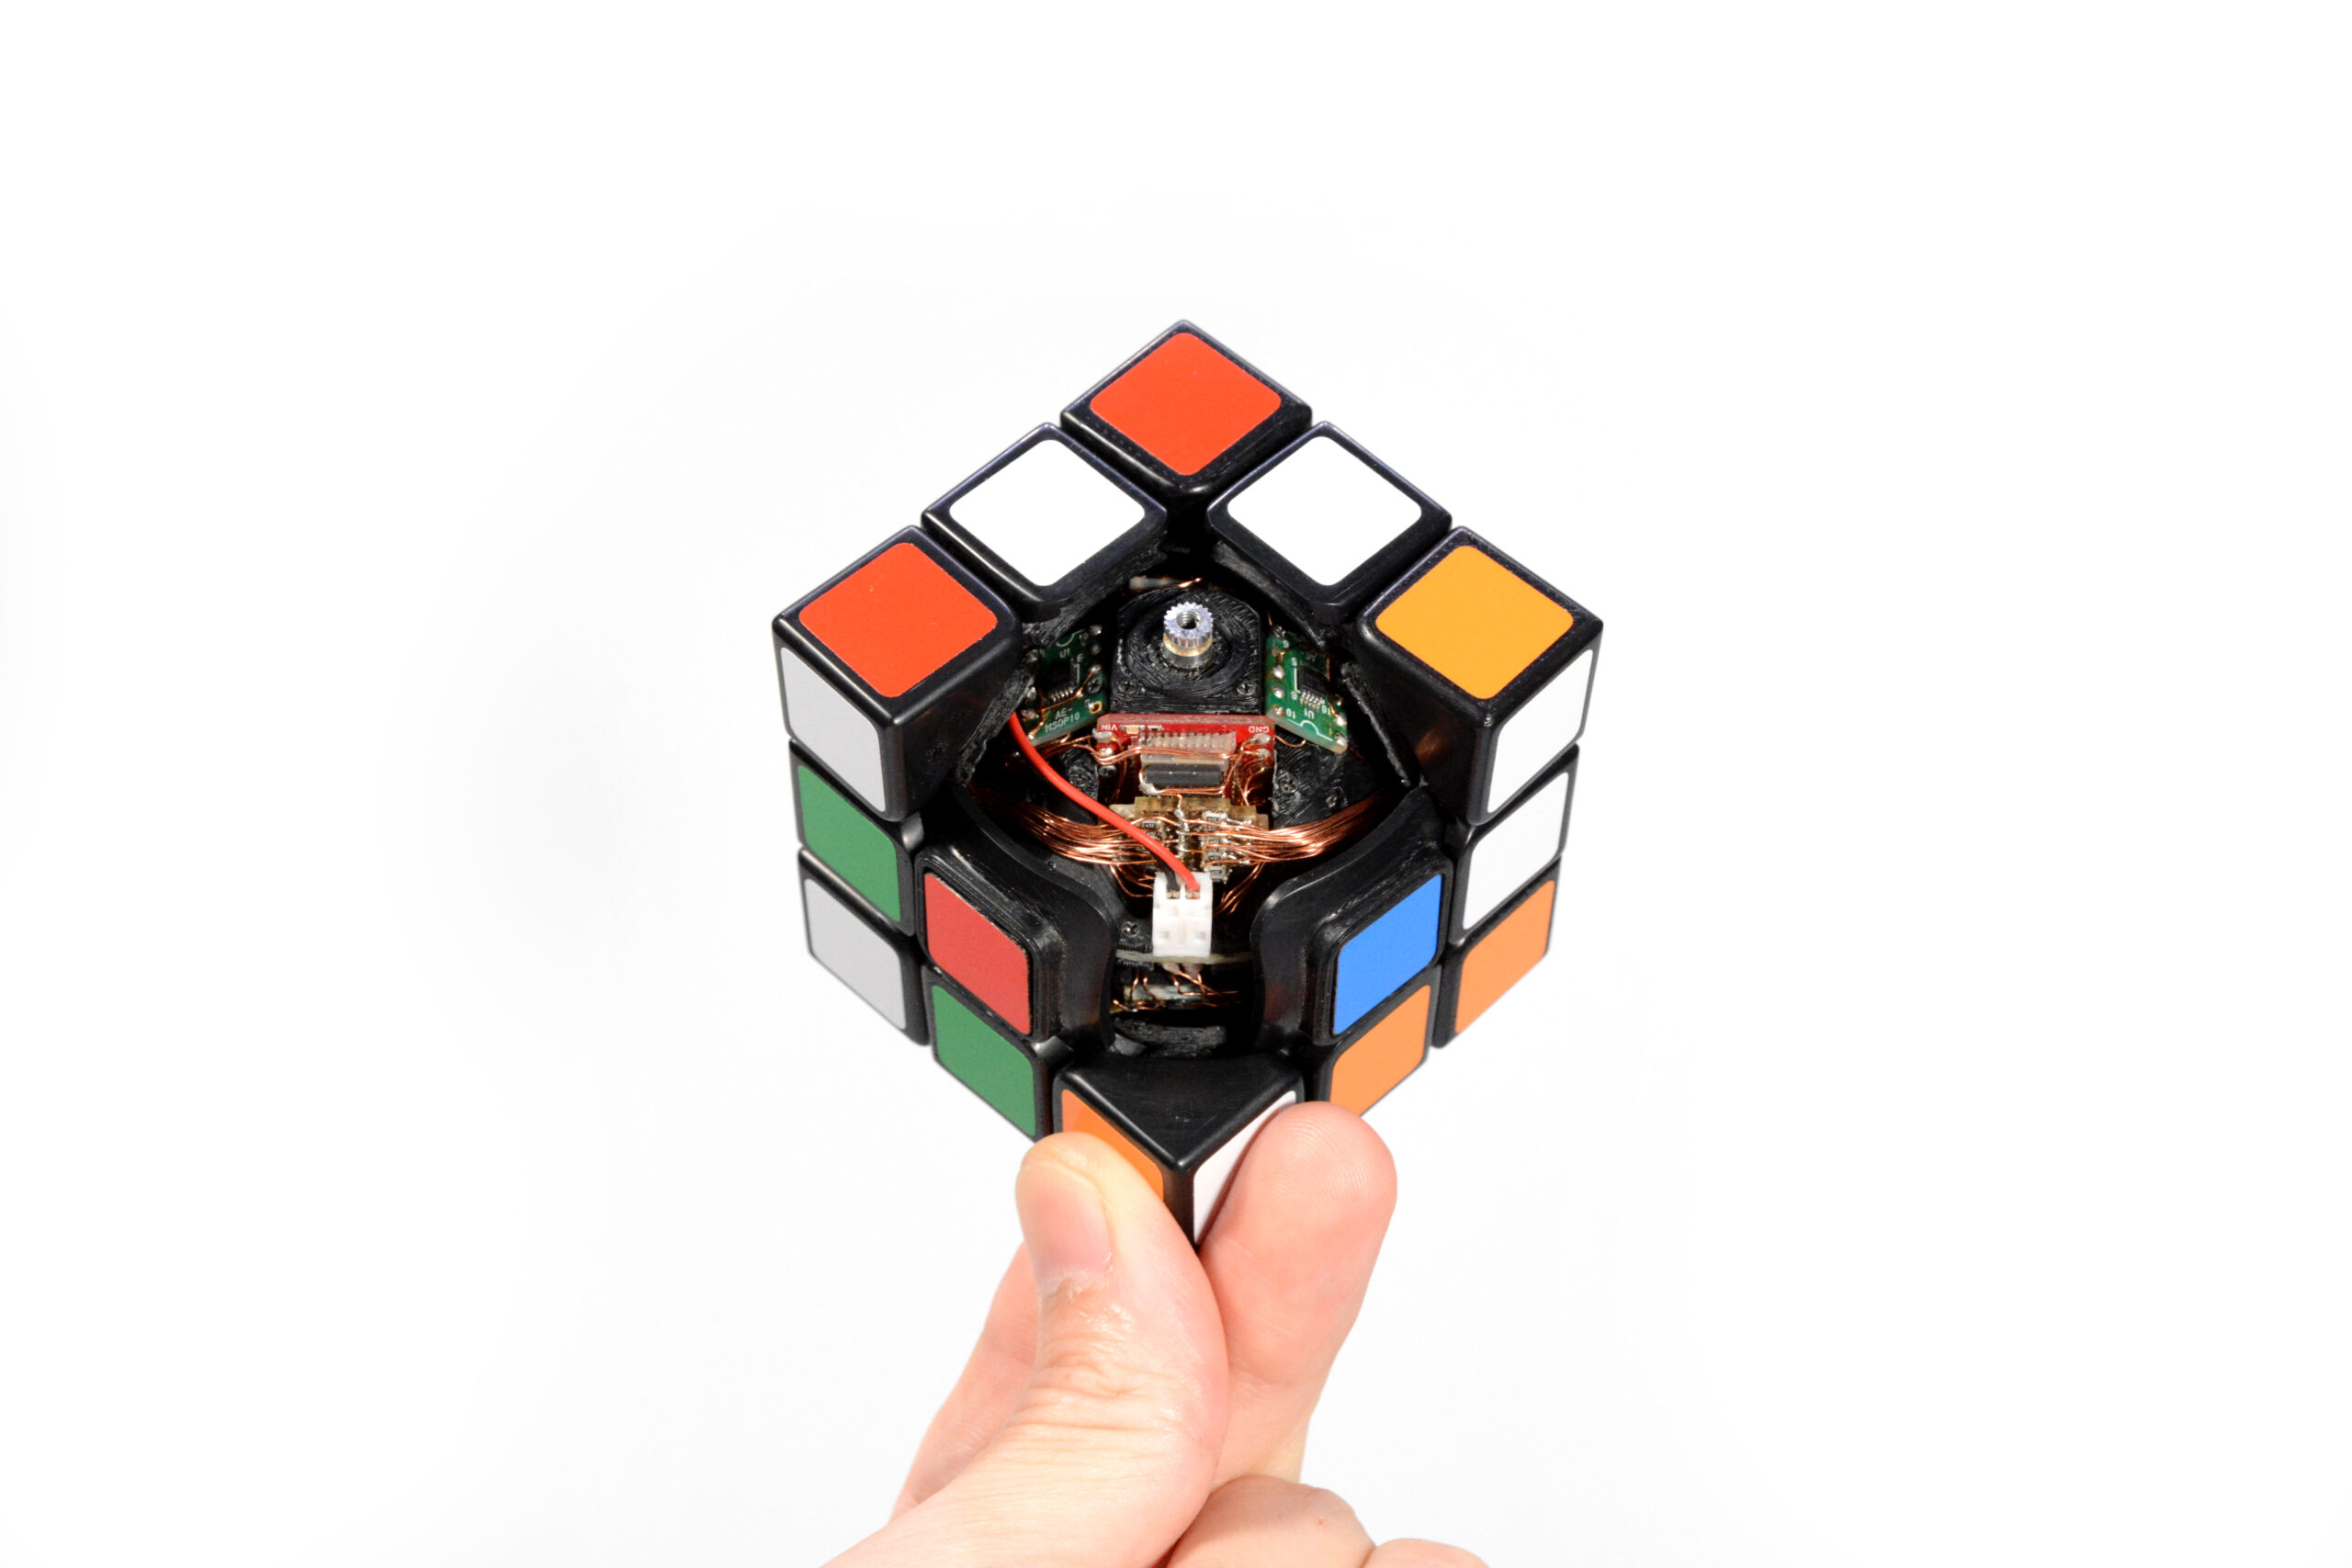 A machine taught itself to solve Rubik's Cube without human help